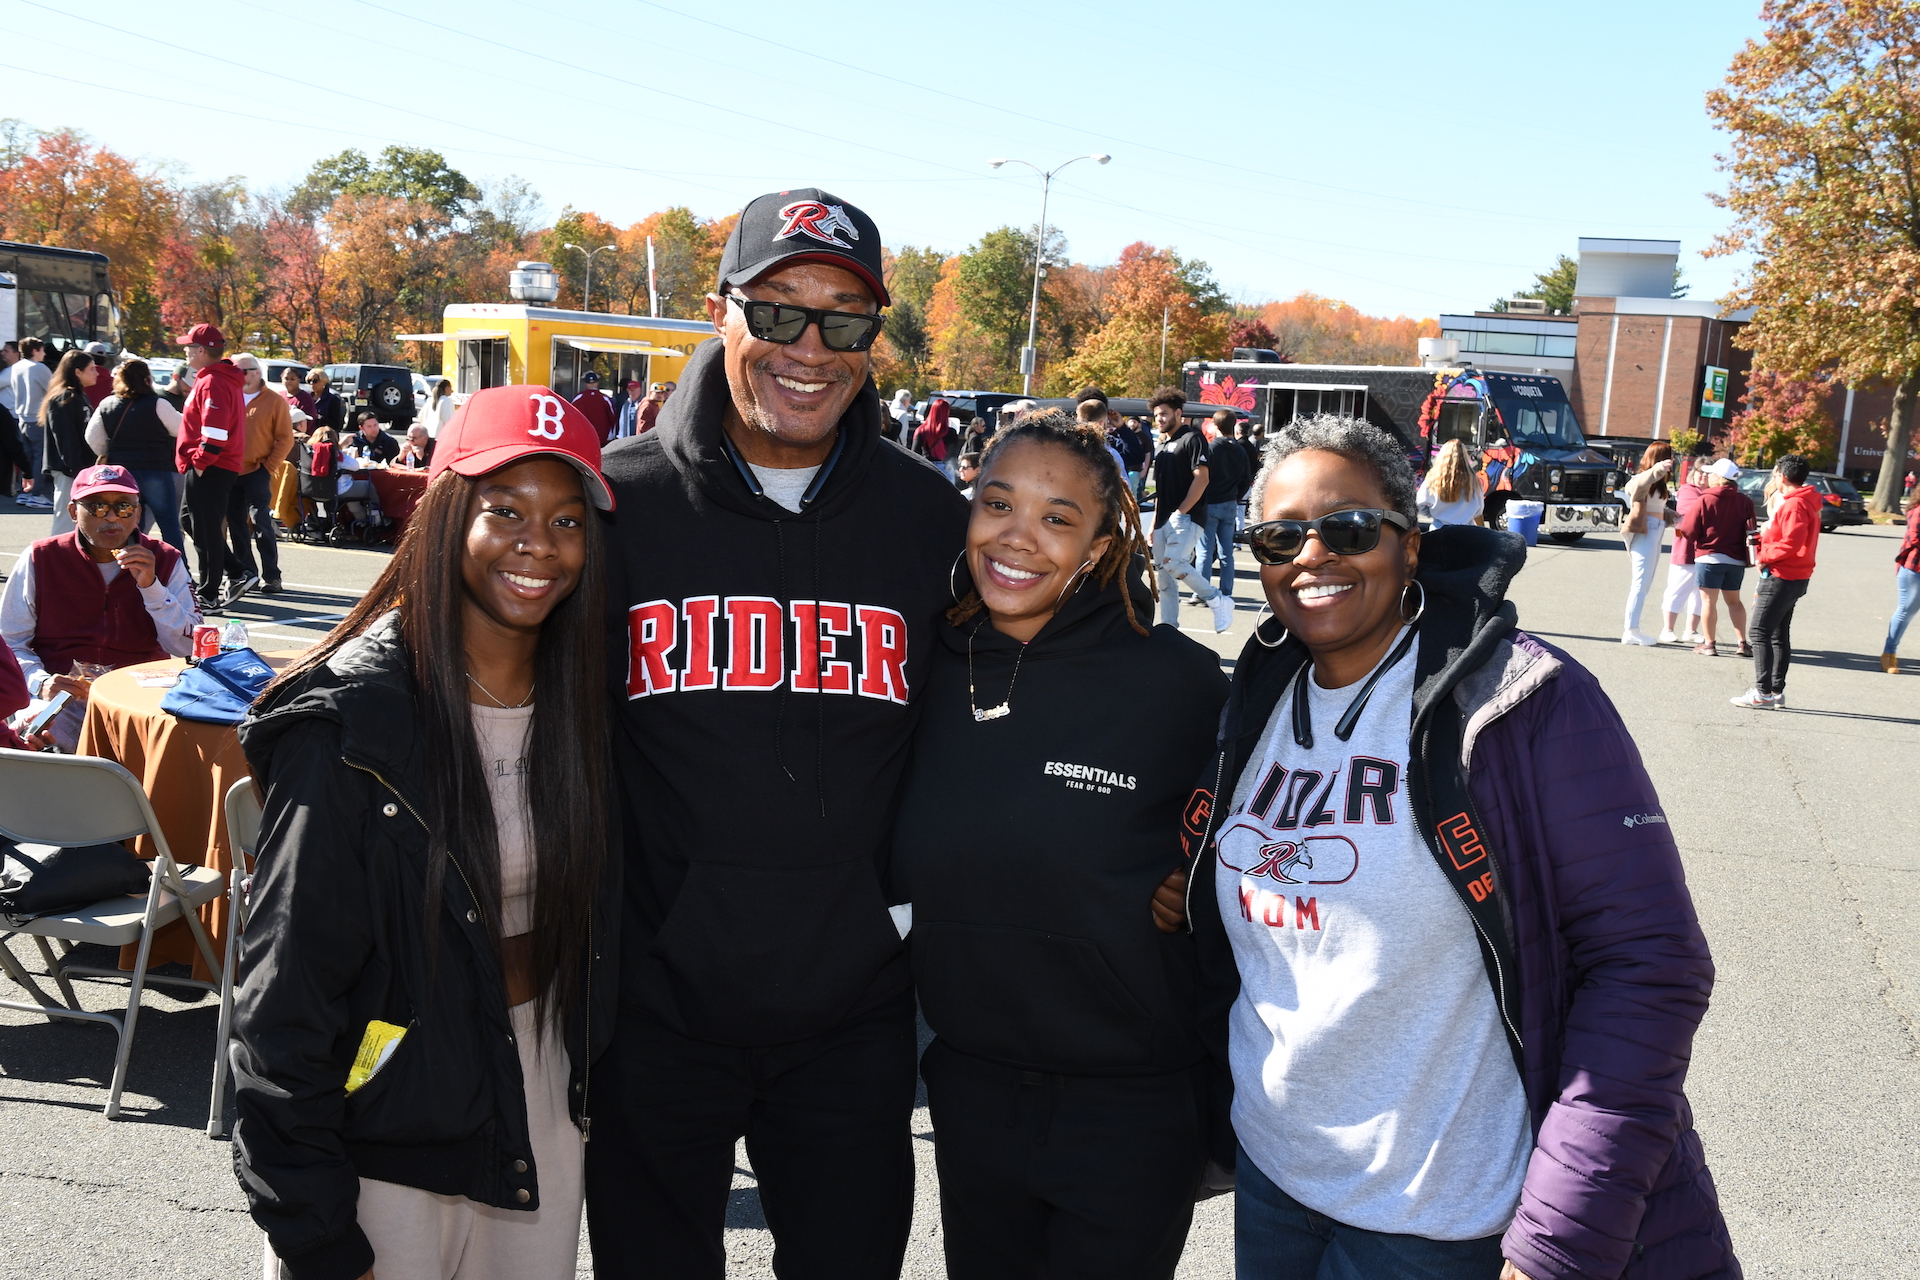 Family pose for photo at Homecoming weekend